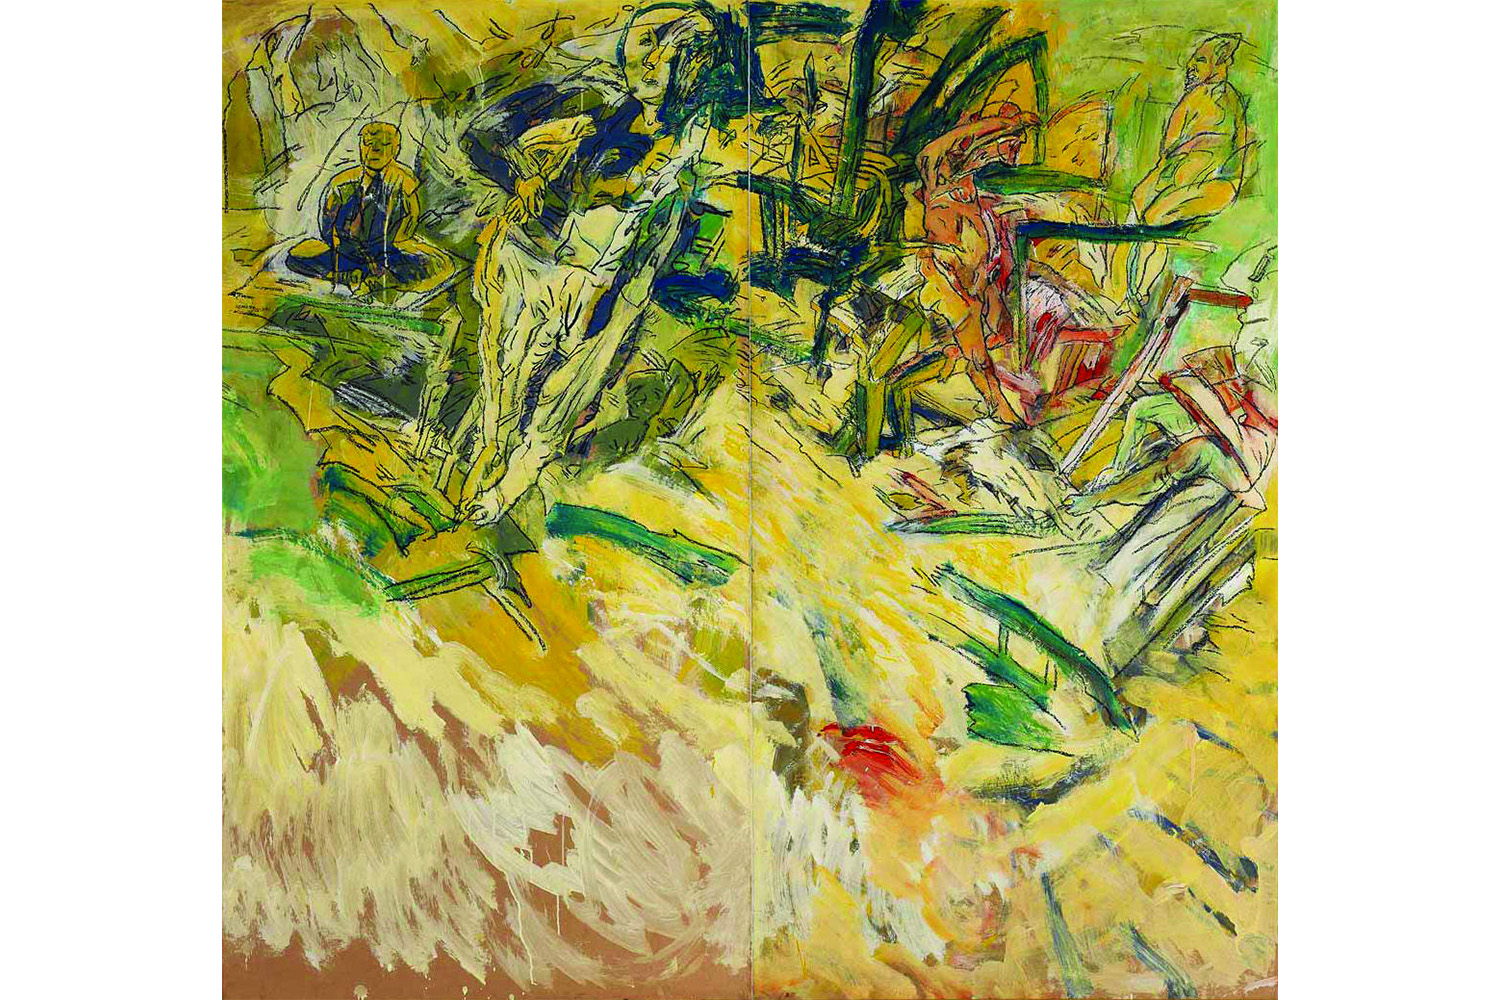 Composition No: 24 (diptych), 2000